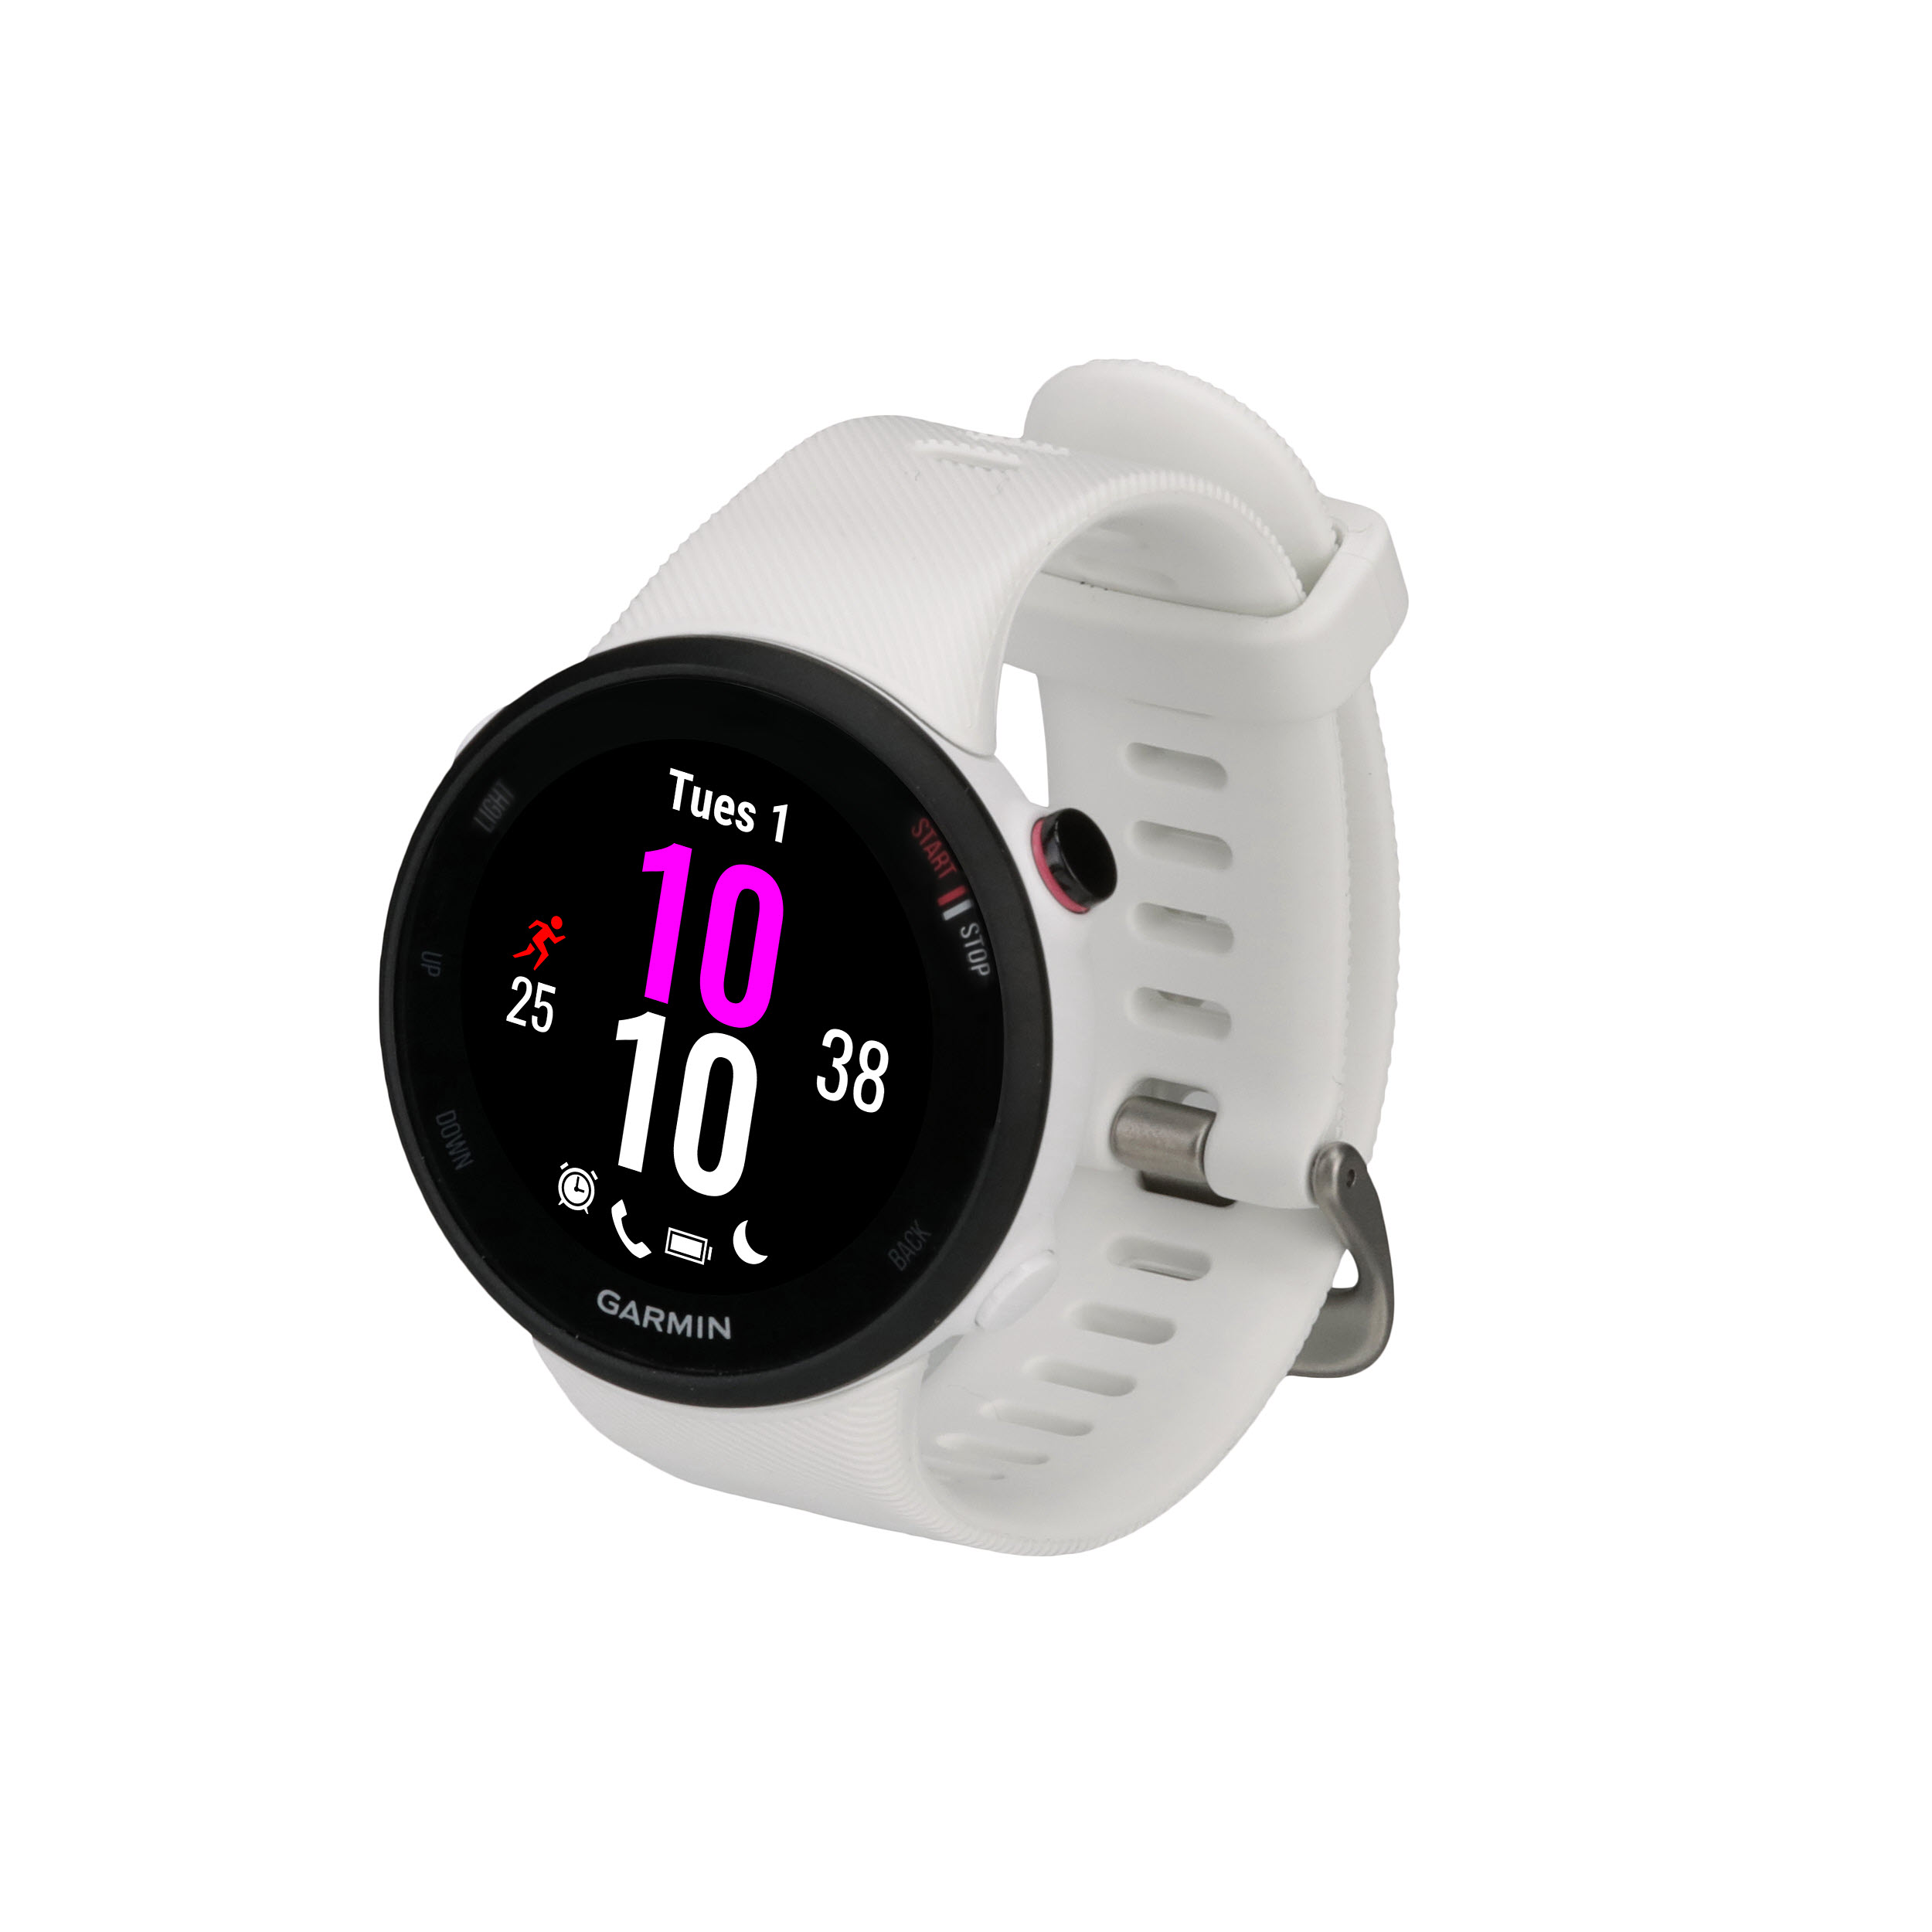 Garmin 010-02156-00 Forerunner 45s, 39MM Easy-to-Use GPS Running Watch with  Garmin Coach Free Training Plan Support, White